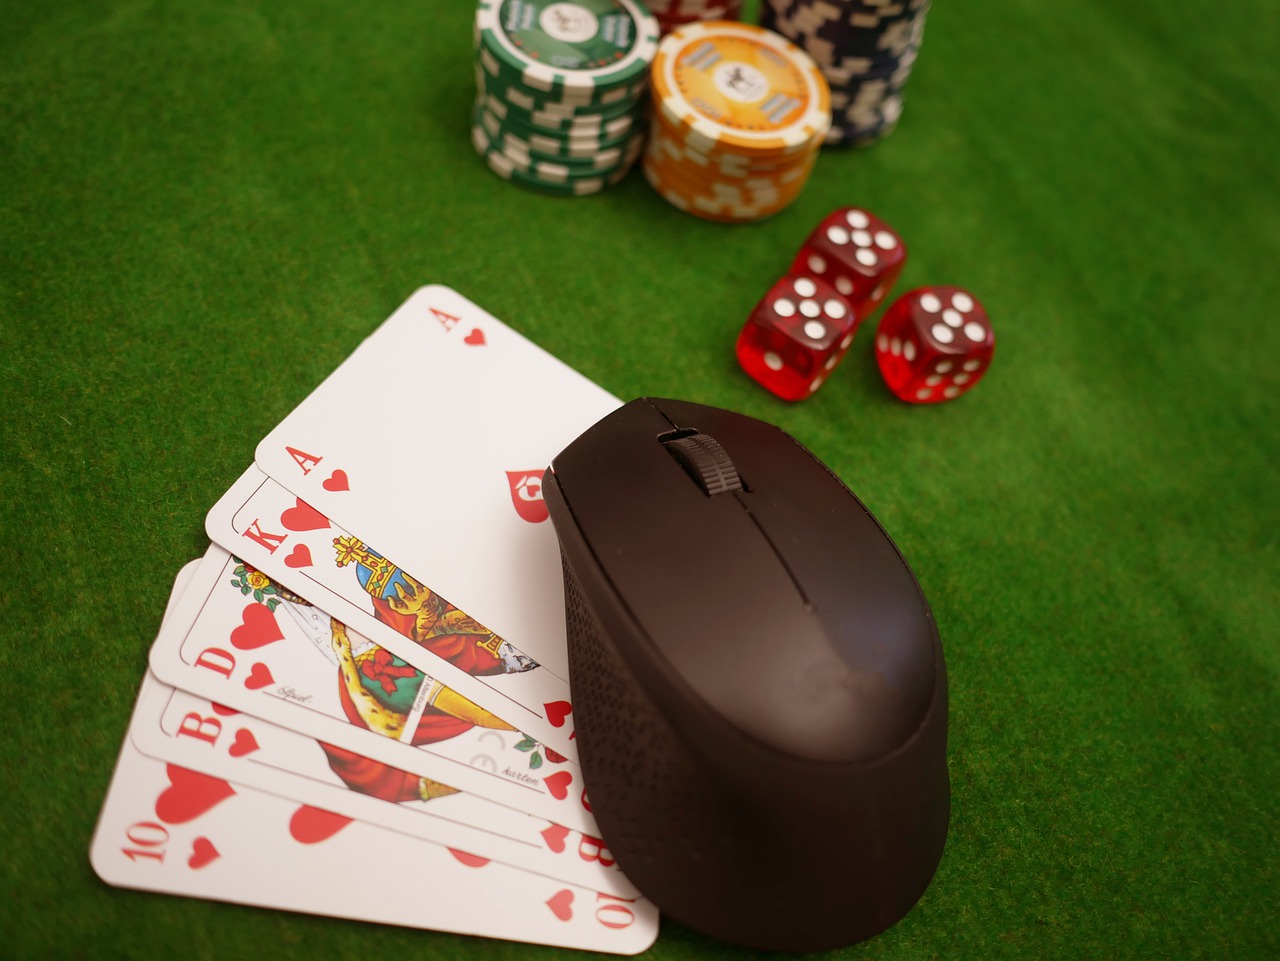 In Spain, the number of players who exclude themselves from online gambling has increased